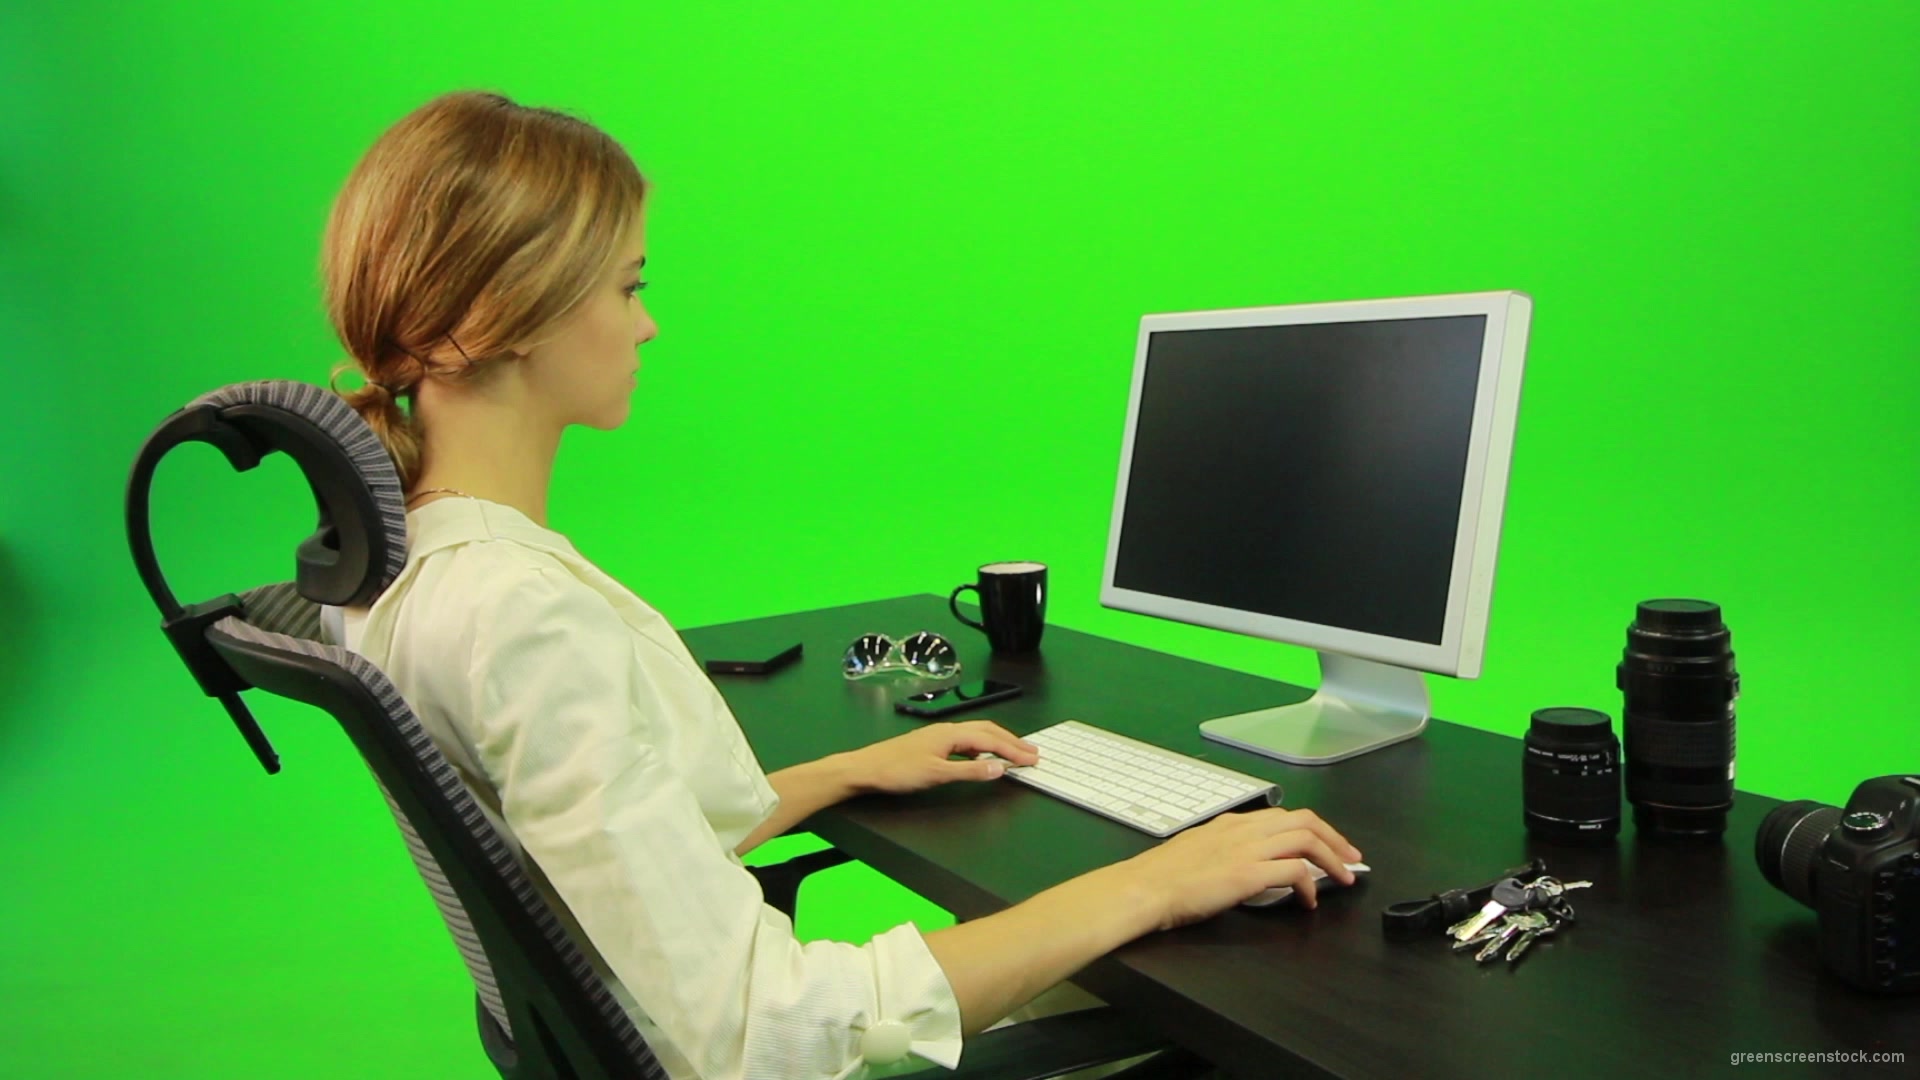 Woman-Working-on-the-Computer-4-Green-Screen-Footage_004 Green Screen Stock